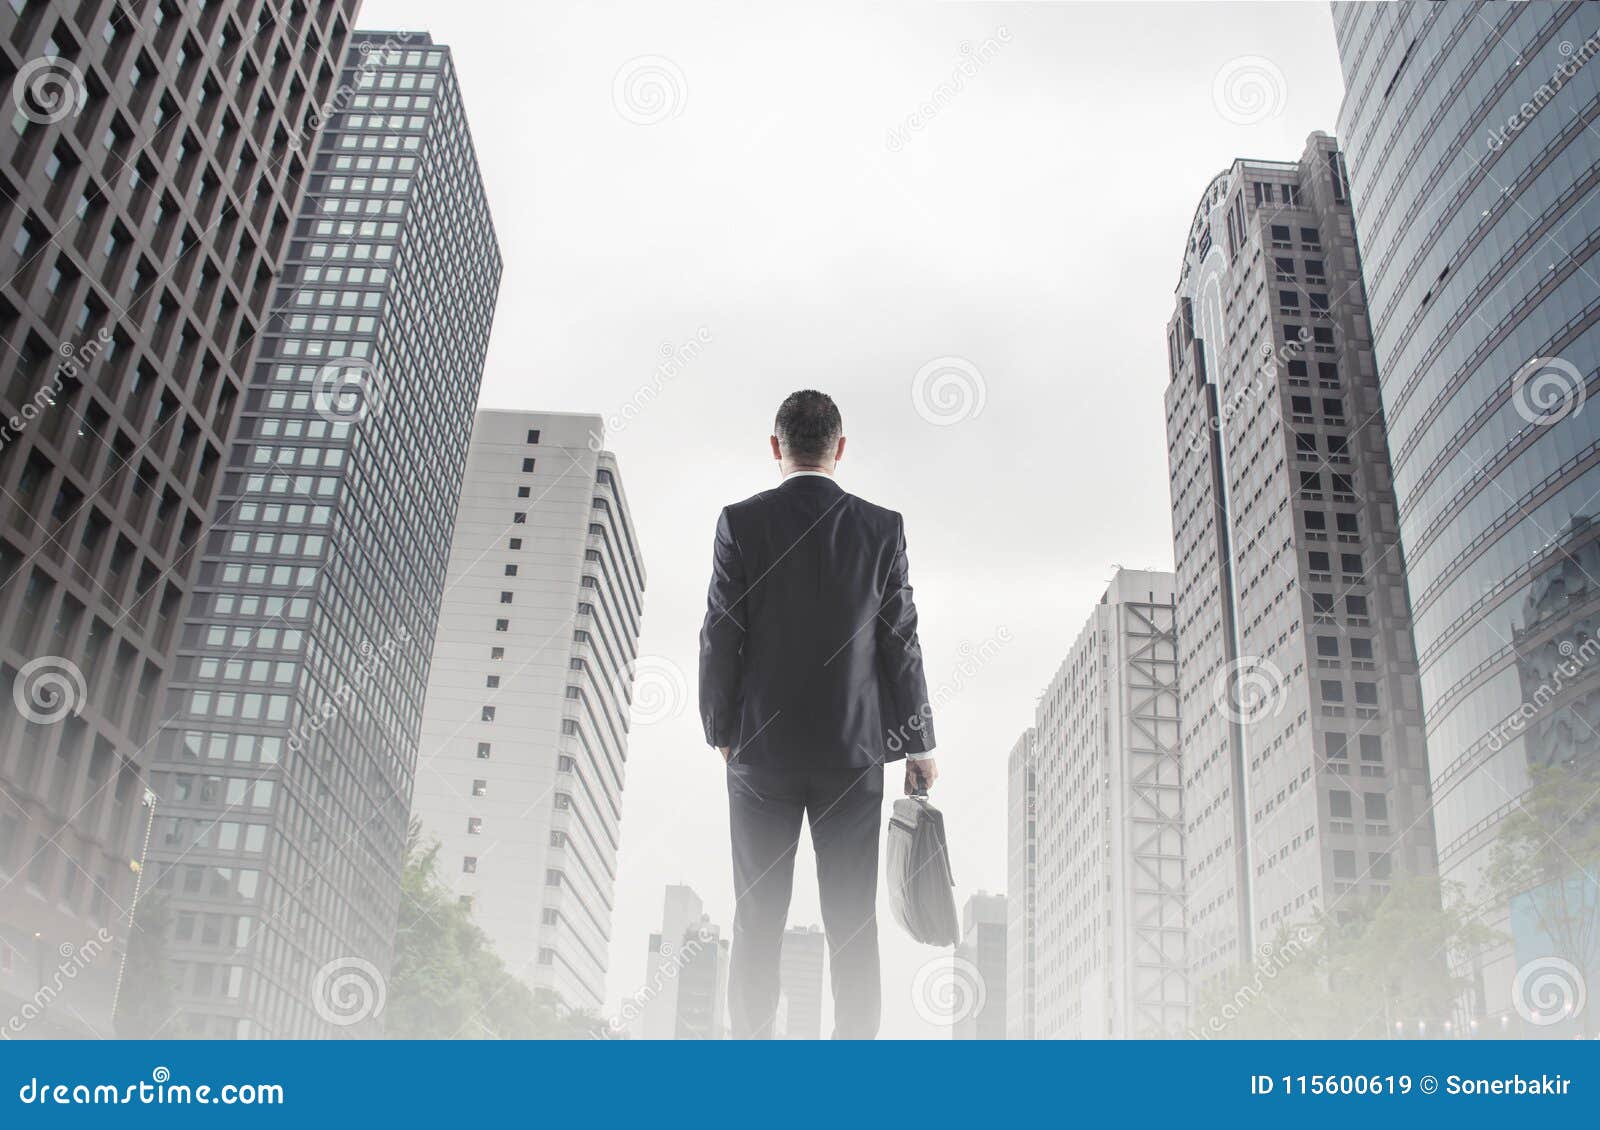 Businessman Looking Across The City Financial District Concept For - businessman looking across the city financial district concept for entrepreneur leadership and success